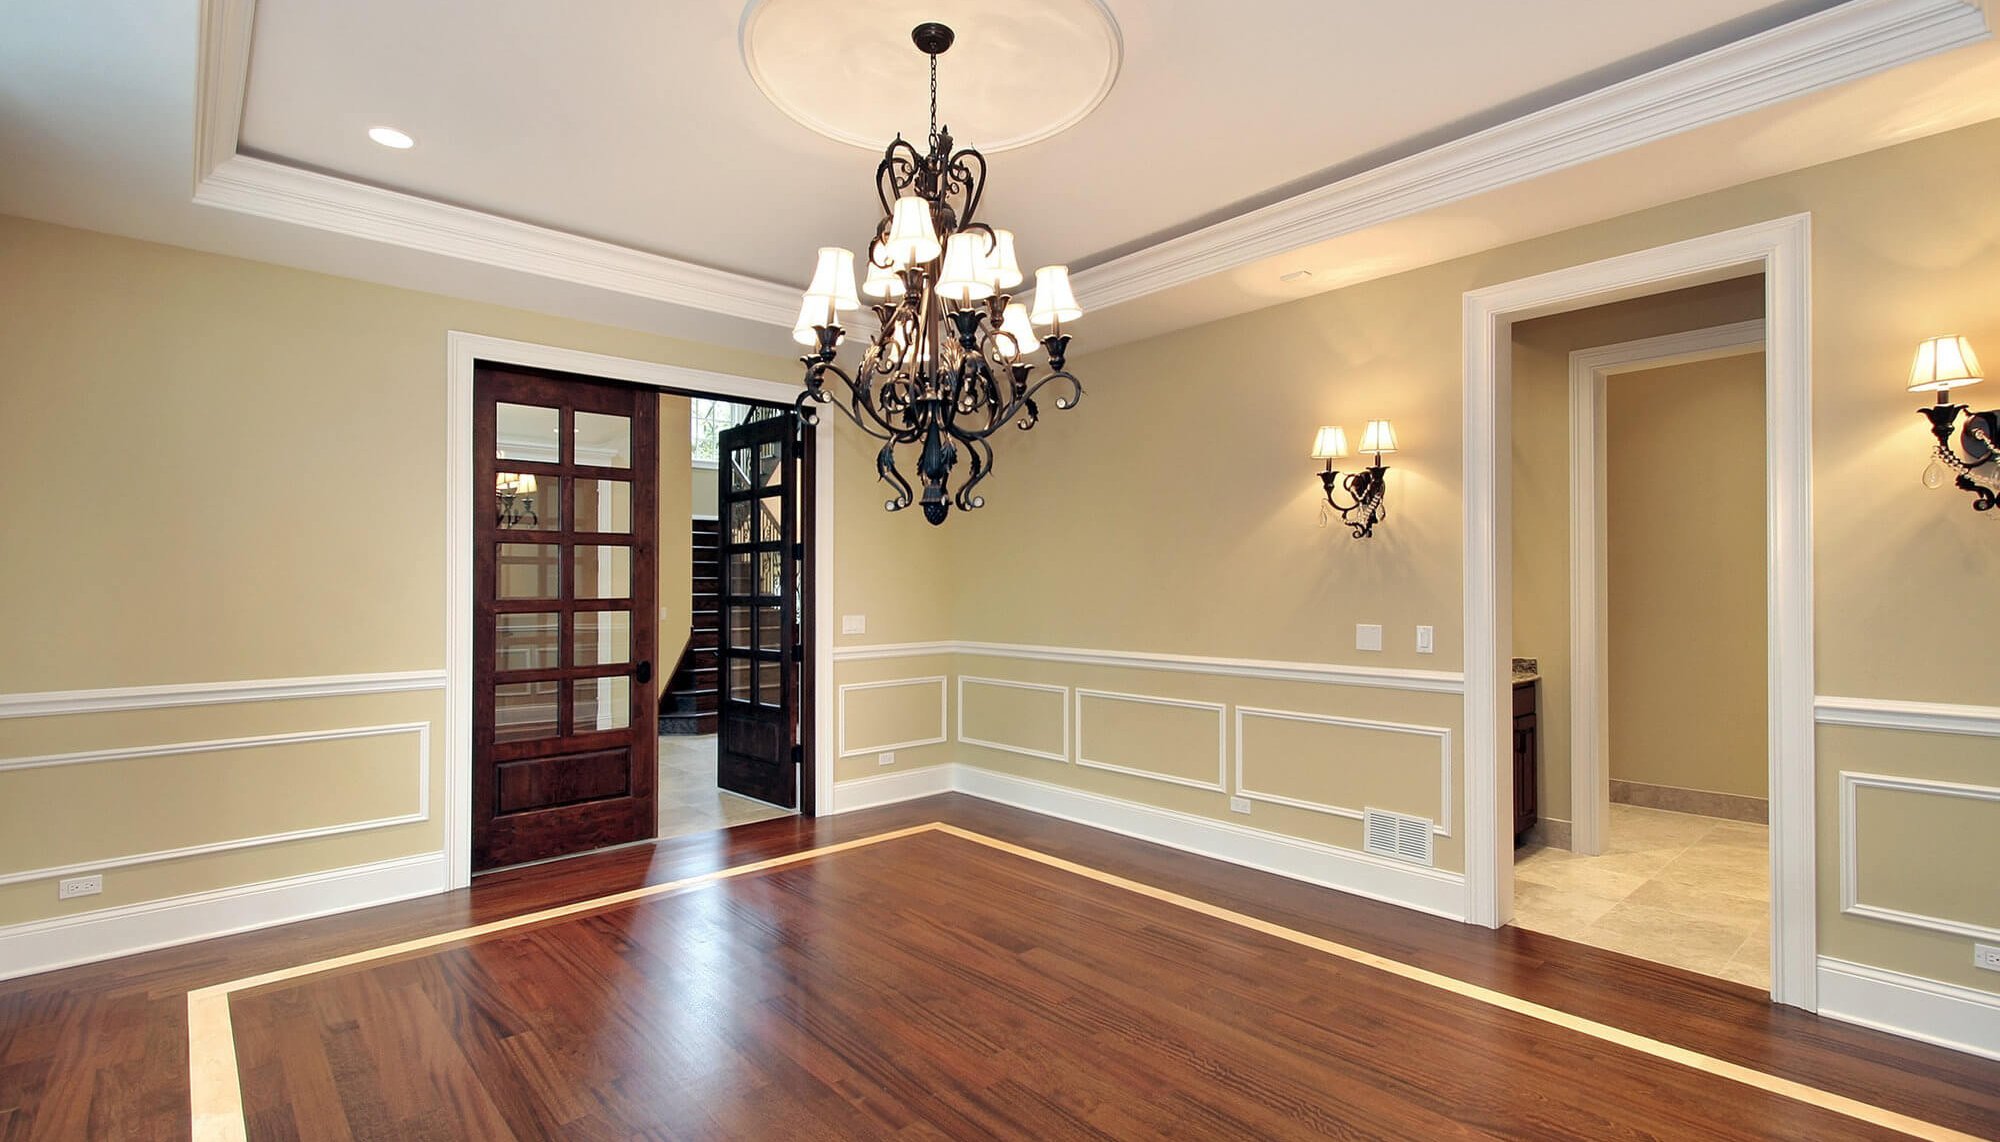 Read Why are Hardwood Floors Considered a Desirable Feature in Homes? by Peter Astle